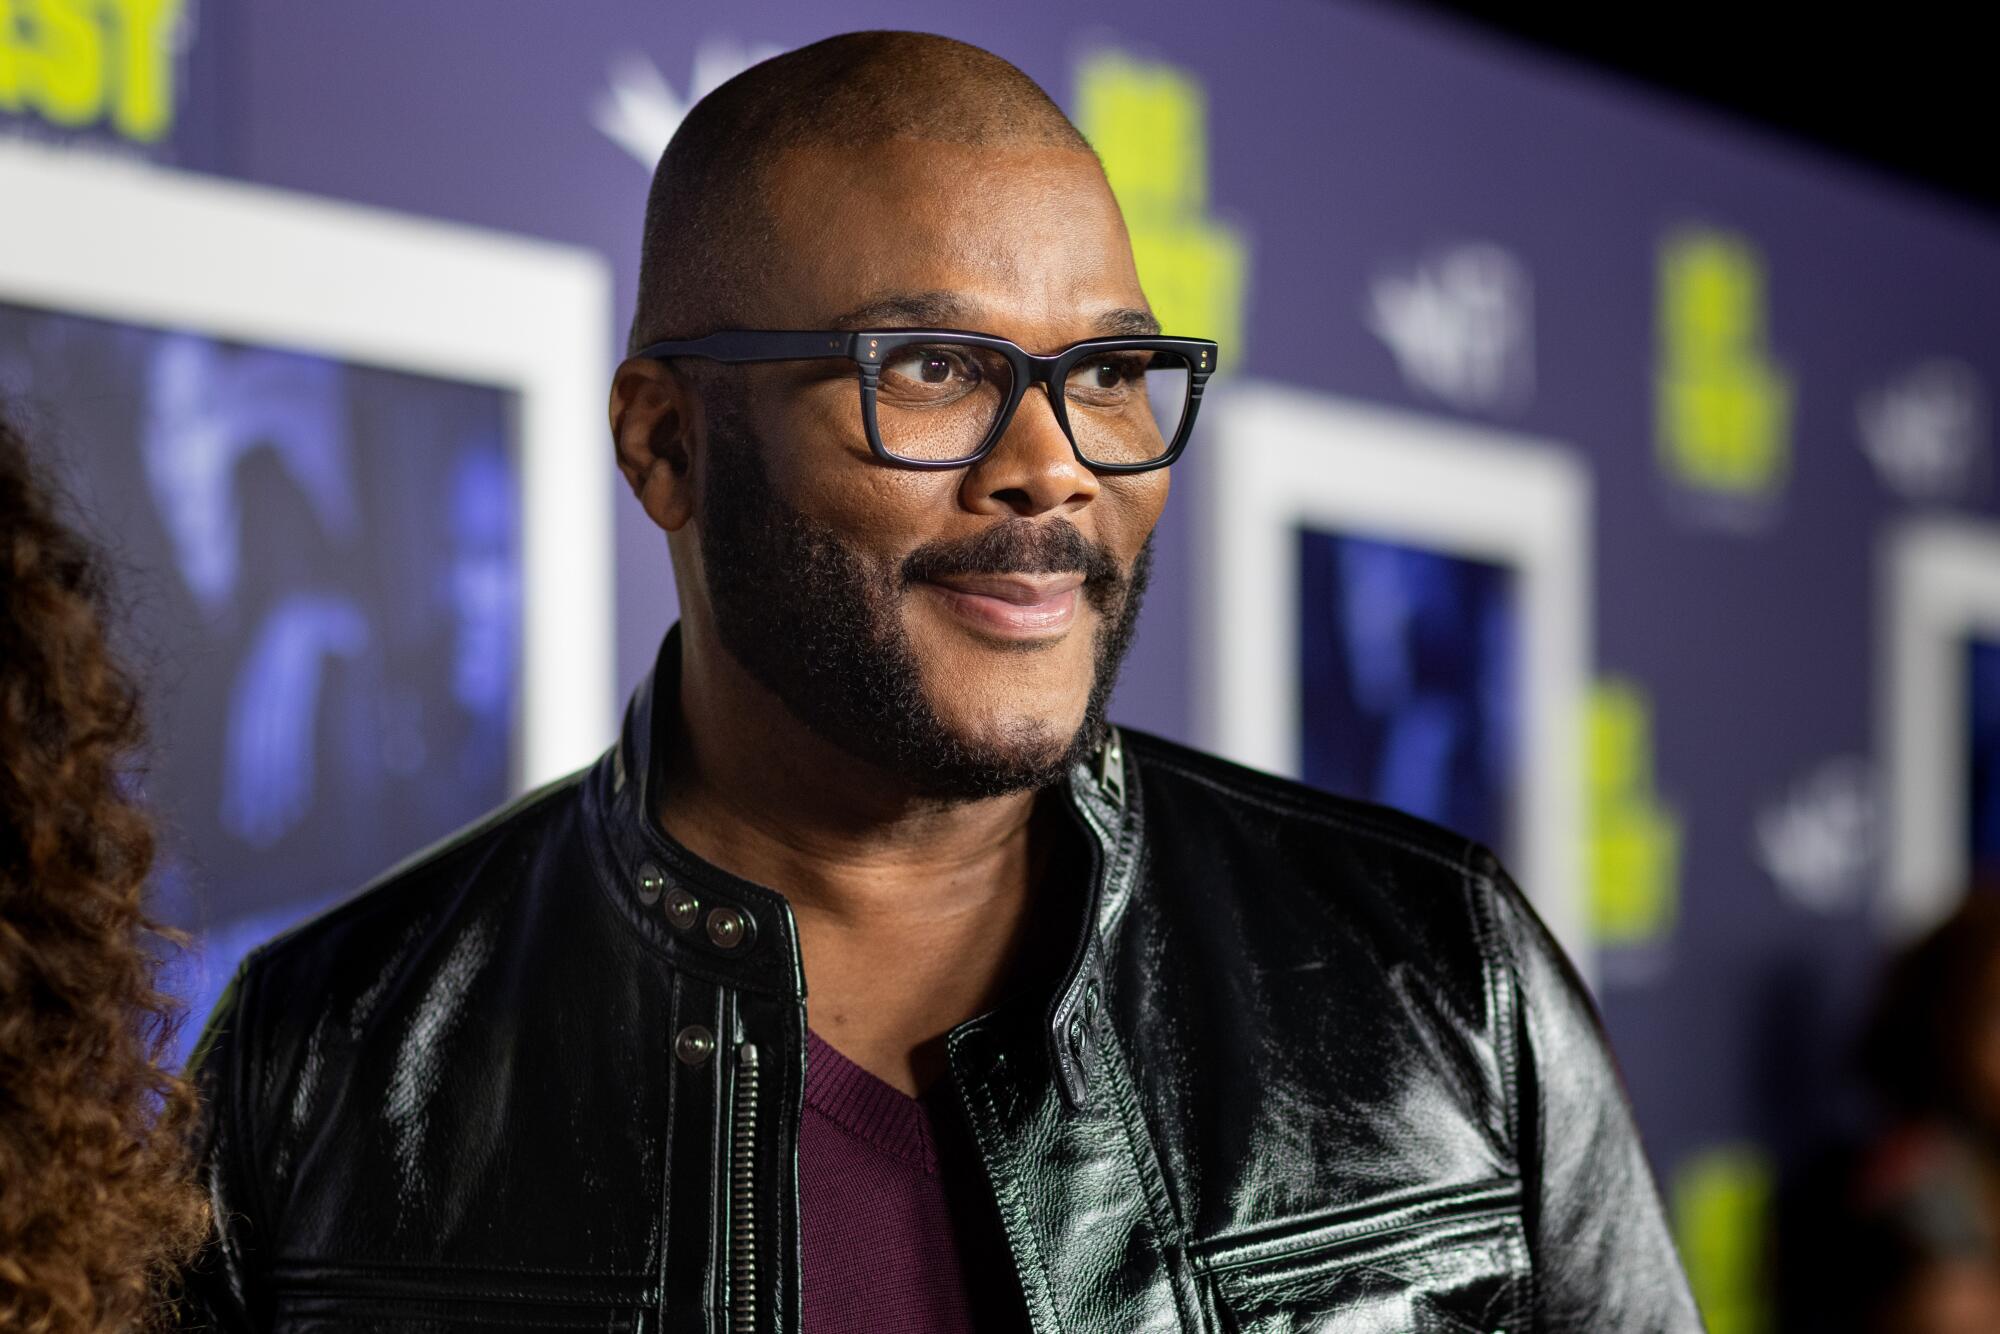 Entertainment mogul Tyler Perry walked the red carpet for the premiere screening of "Maxine's Baby: The Tyler Perry Story."